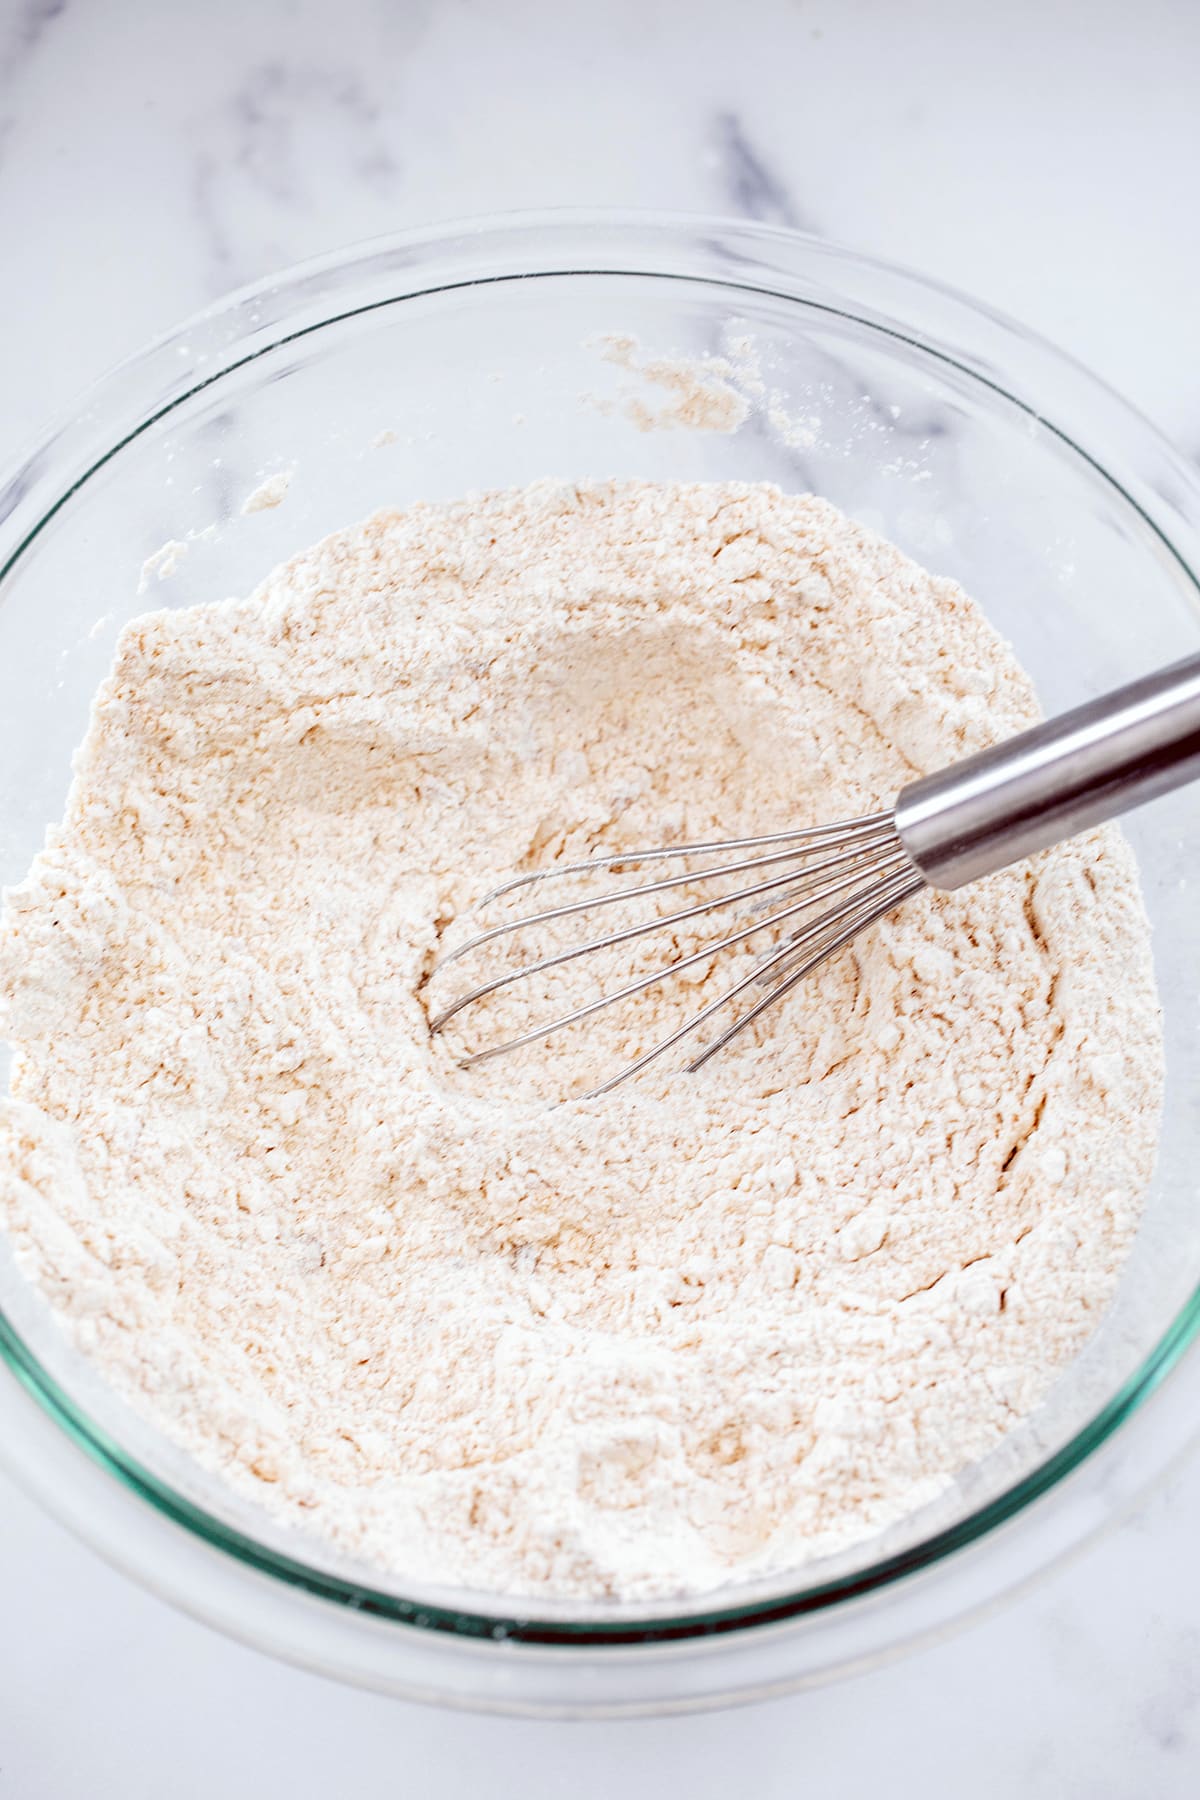 Dry ingredients mixed together in bowl with whisk.